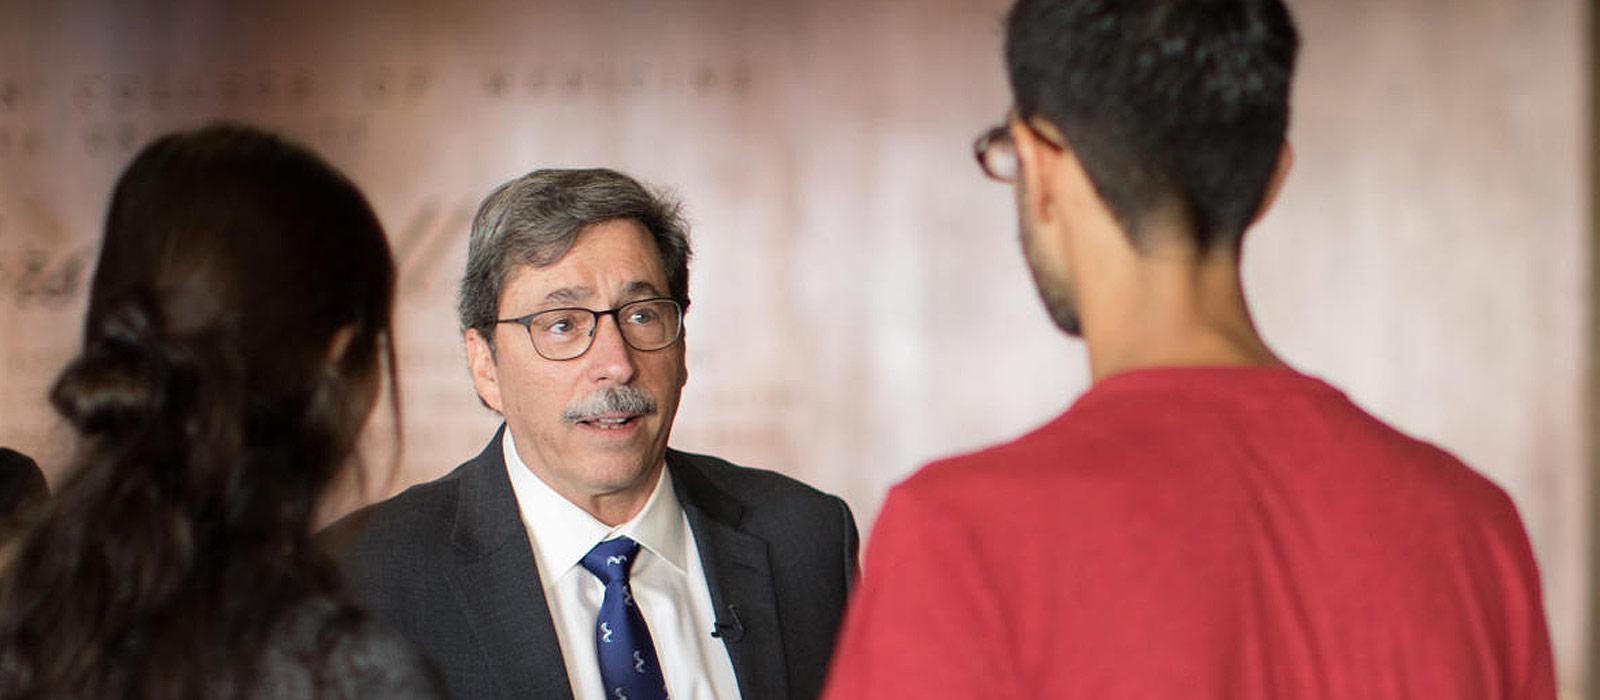 Dean Q&A: Dr. Tomaselli on His First Year at Einstein and Plans for the Future